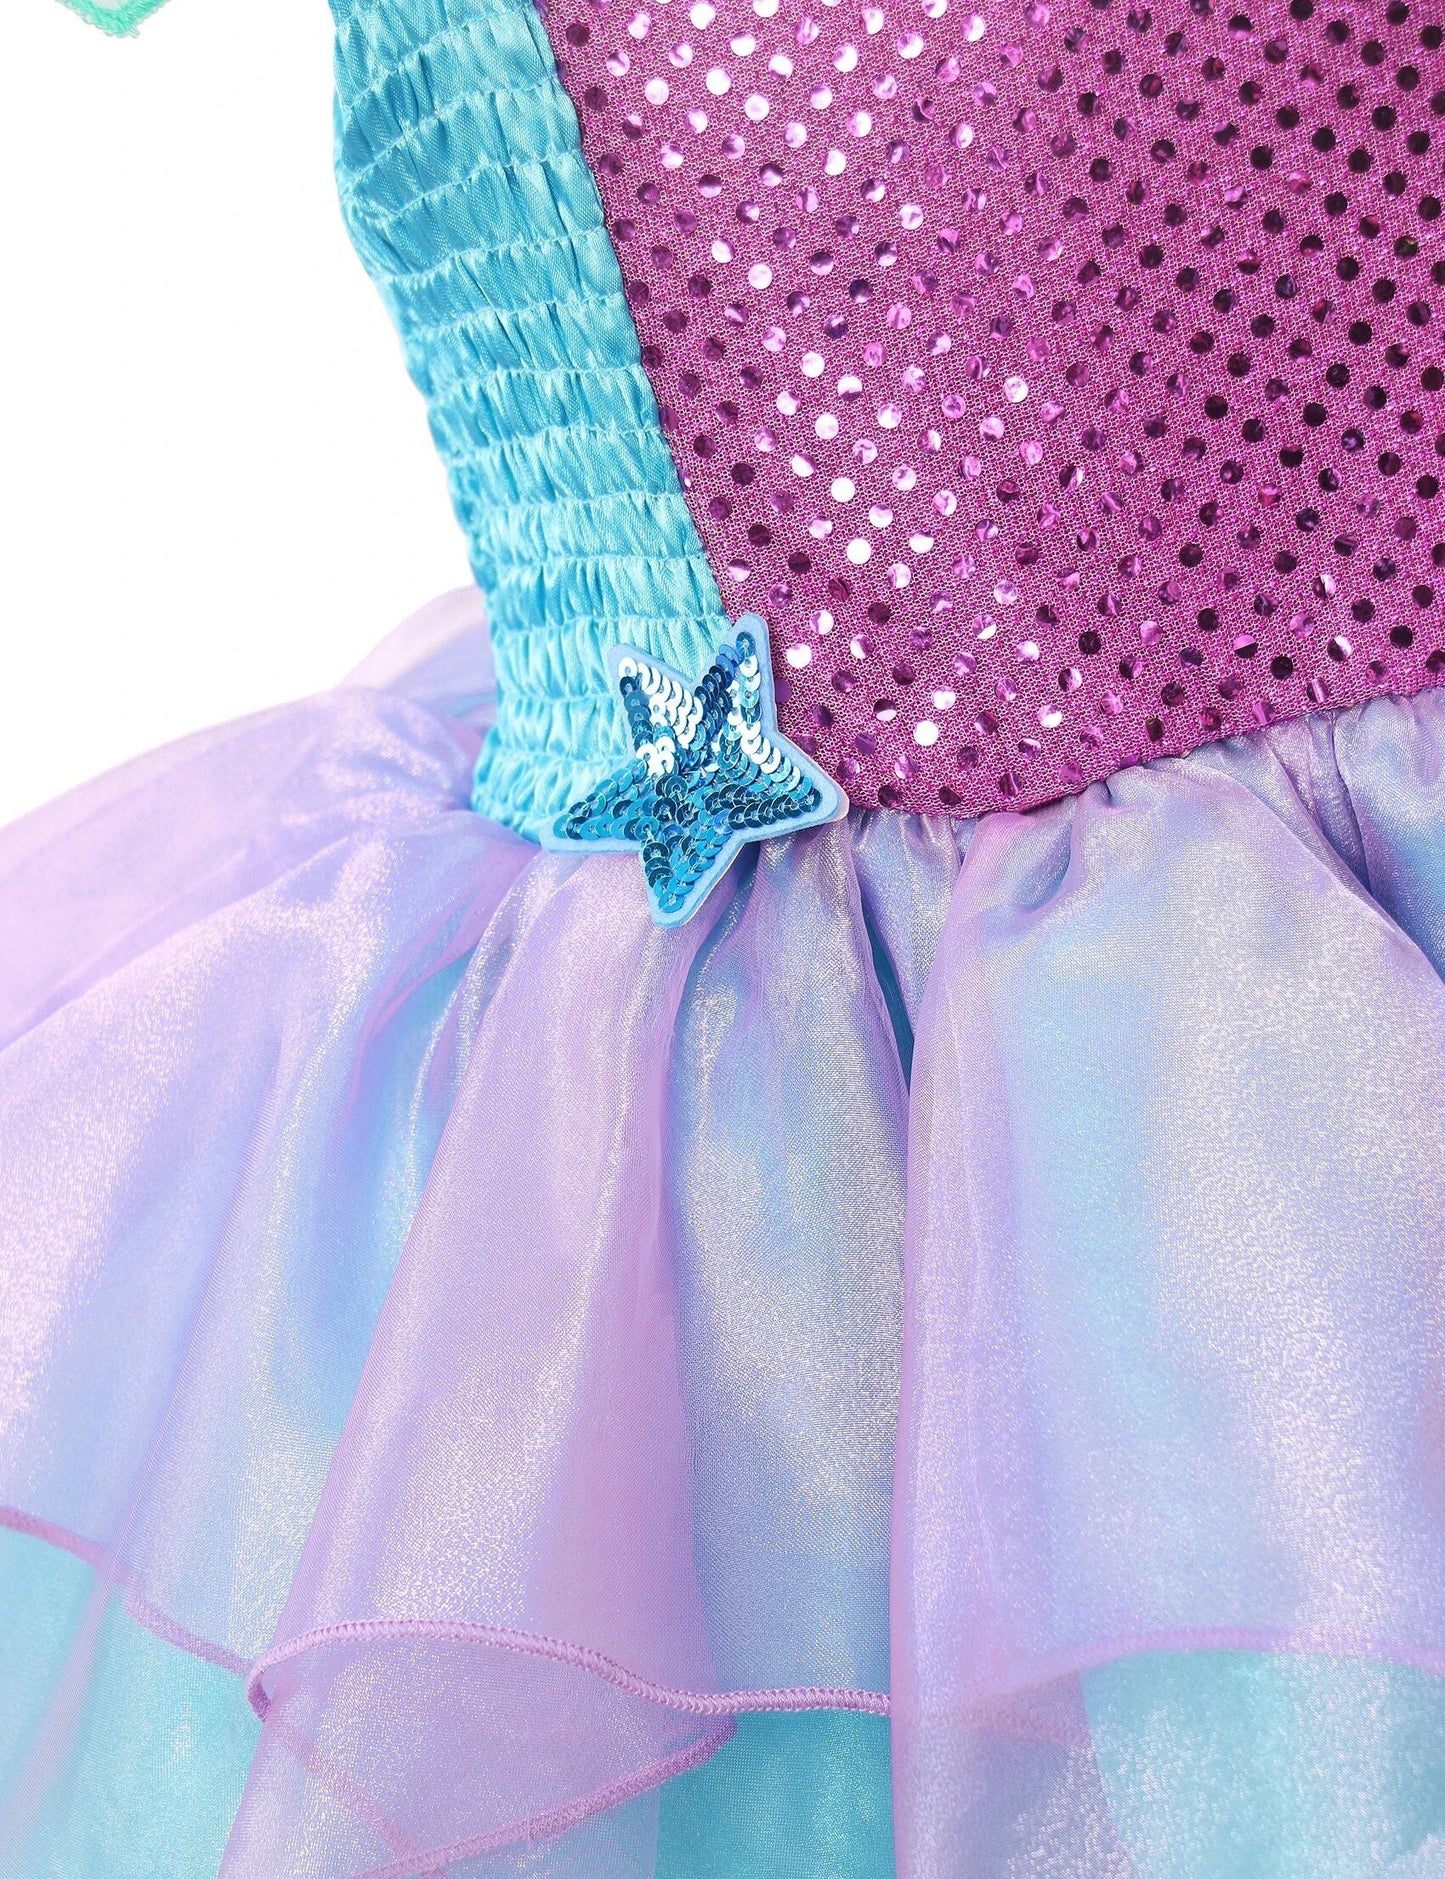 Girls Cosplay New Mermaid Princess Ariel Costume Kids Layers Tulle Tutu Dress Party Birthday Sequin Mermaid Clothes Toddler Girls